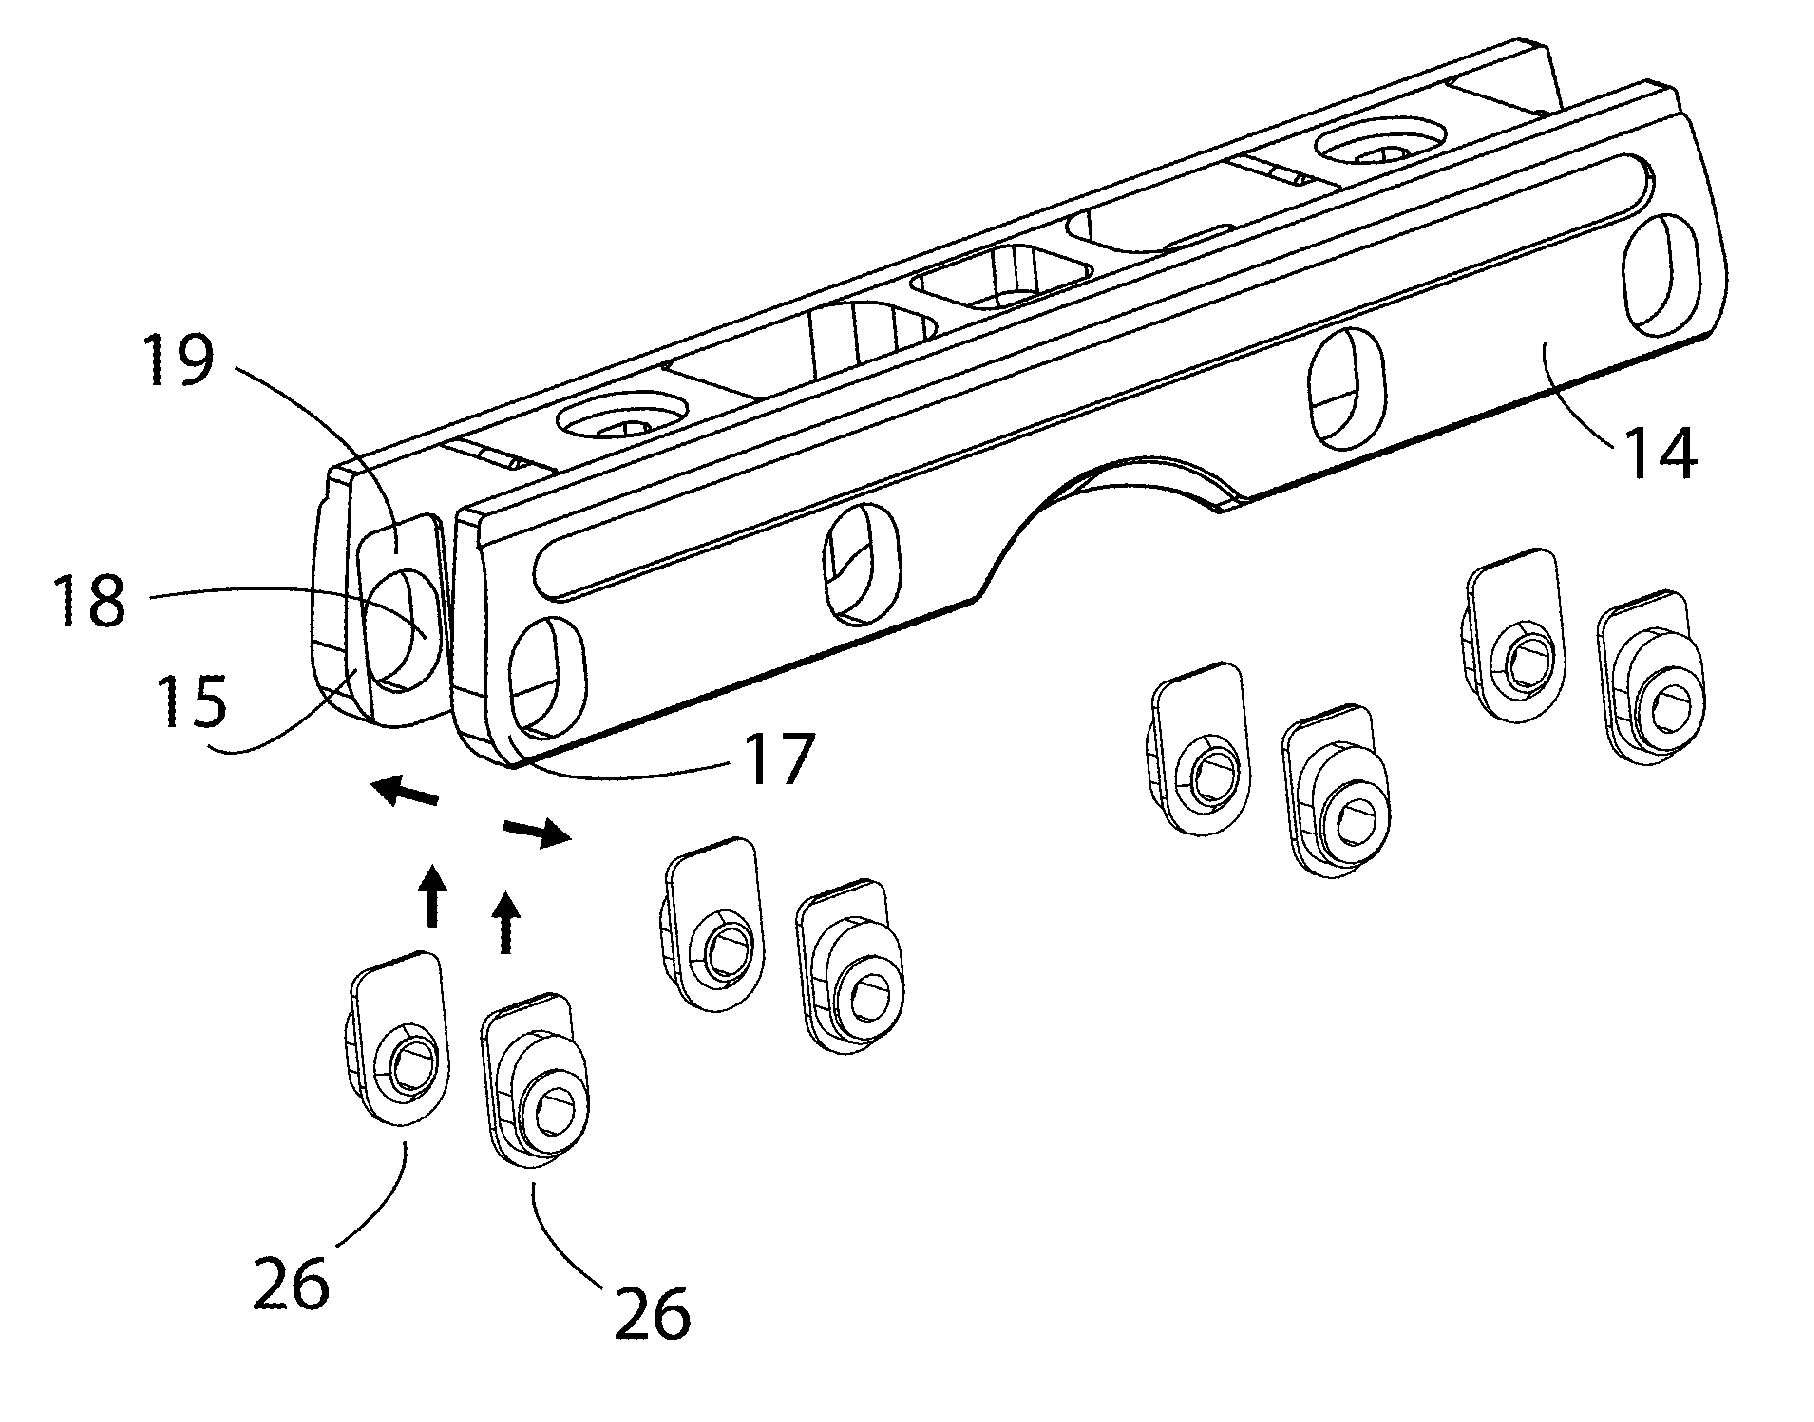 Interchangeable axle suspension spacer slider system and method of making same